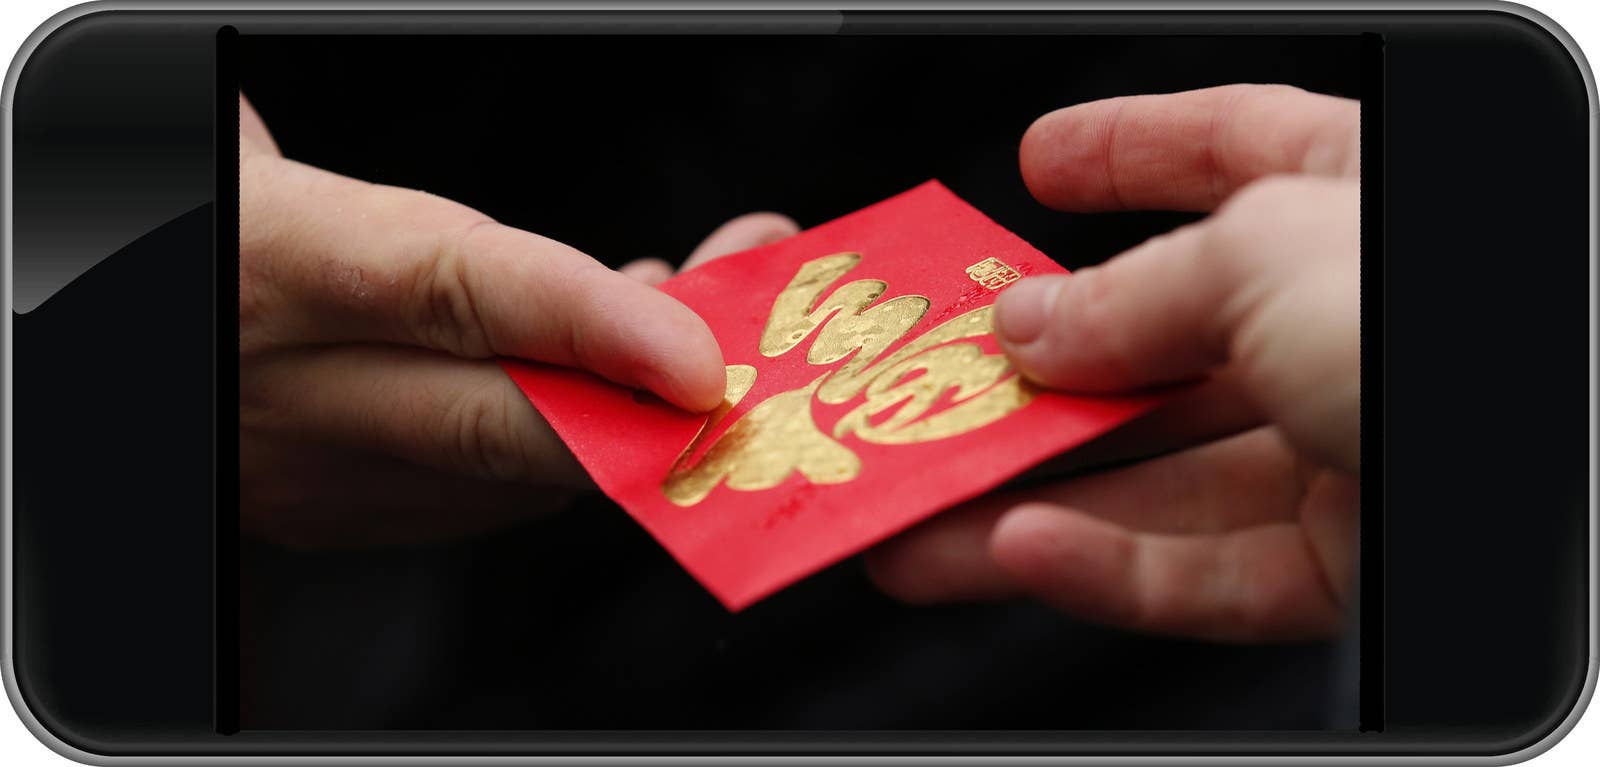 Bank of America Lucky Red Envelope - 10 Pack